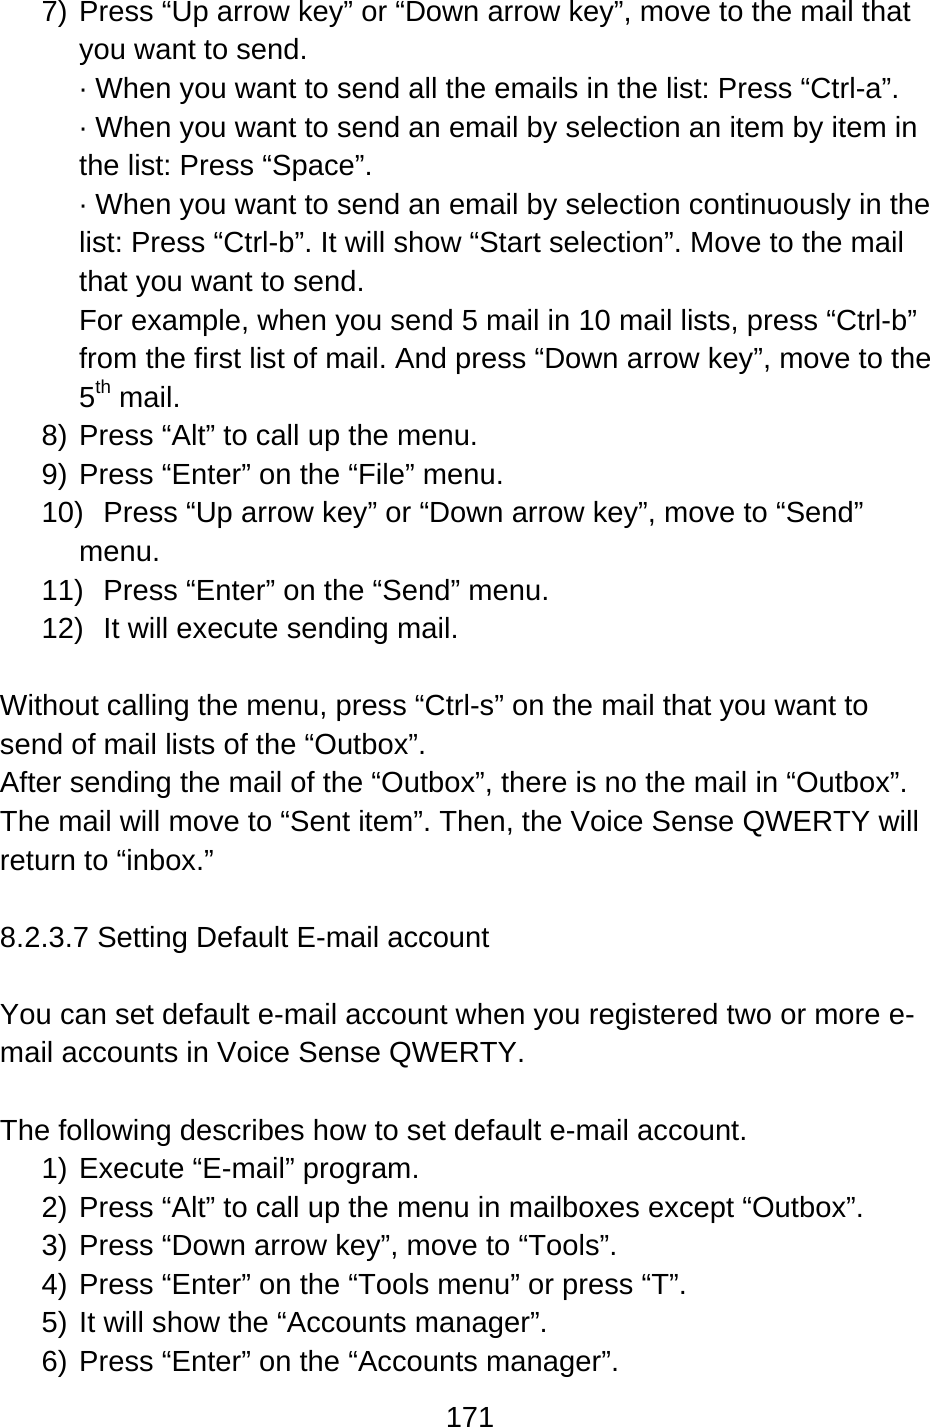 171  7) Press “Up arrow key” or “Down arrow key”, move to the mail that you want to send. · When you want to send all the emails in the list: Press “Ctrl-a”. · When you want to send an email by selection an item by item in the list: Press “Space”. · When you want to send an email by selection continuously in the list: Press “Ctrl-b”. It will show “Start selection”. Move to the mail that you want to send.   For example, when you send 5 mail in 10 mail lists, press “Ctrl-b” from the first list of mail. And press “Down arrow key”, move to the 5th mail. 8) Press “Alt” to call up the menu. 9) Press “Enter” on the “File” menu. 10)  Press “Up arrow key” or “Down arrow key”, move to “Send” menu. 11) Press “Enter” on the “Send” menu. 12)  It will execute sending mail.  Without calling the menu, press “Ctrl-s” on the mail that you want to send of mail lists of the “Outbox”. After sending the mail of the “Outbox”, there is no the mail in “Outbox”. The mail will move to “Sent item”. Then, the Voice Sense QWERTY will return to “inbox.”  8.2.3.7 Setting Default E-mail account  You can set default e-mail account when you registered two or more e-mail accounts in Voice Sense QWERTY.    The following describes how to set default e-mail account. 1) Execute “E-mail” program. 2) Press “Alt” to call up the menu in mailboxes except “Outbox”. 3) Press “Down arrow key”, move to “Tools”. 4) Press “Enter” on the “Tools menu” or press “T”. 5) It will show the “Accounts manager”. 6) Press “Enter” on the “Accounts manager”.   